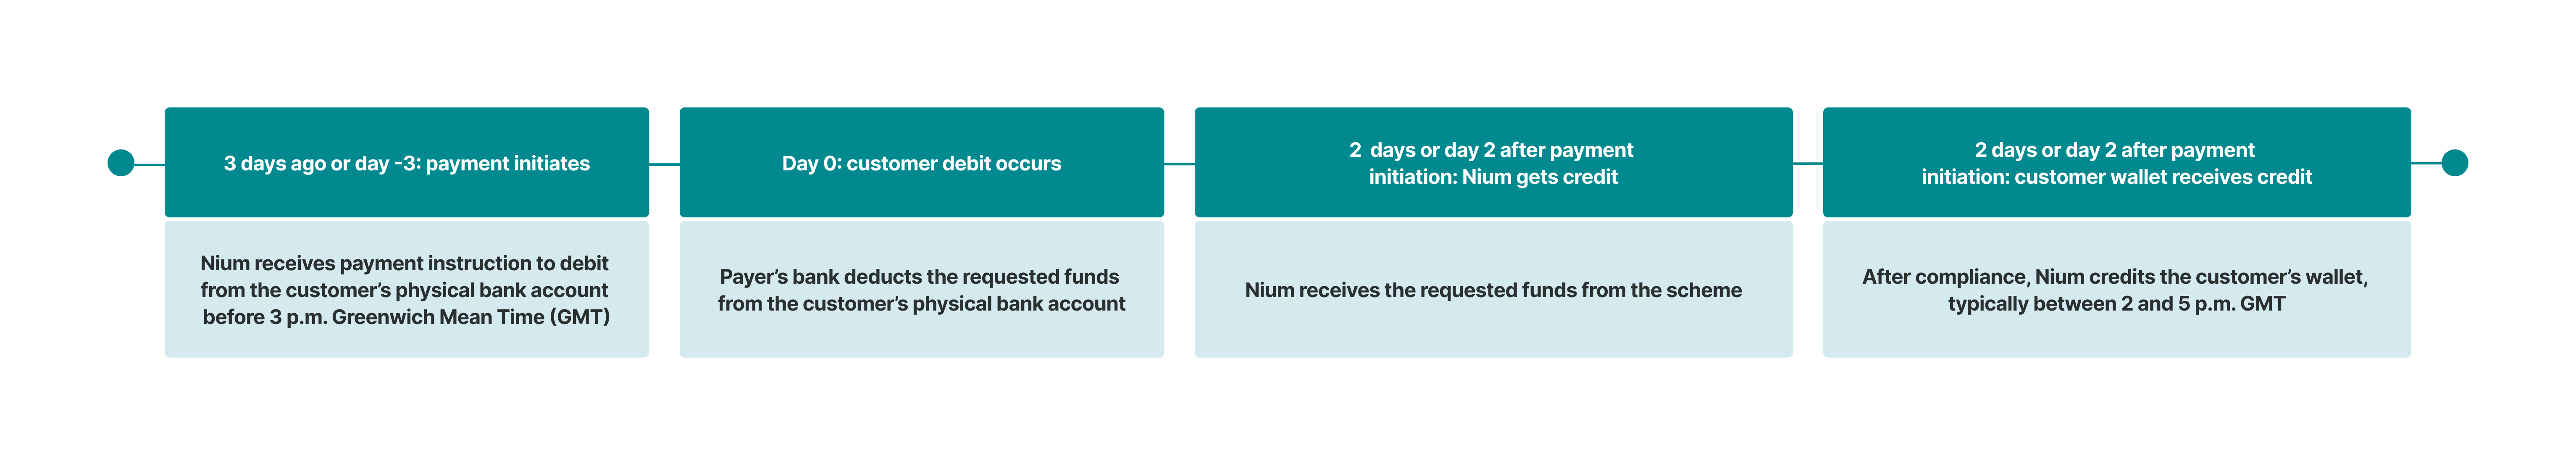 A diagram showing the UK Direct Debit settlement timing, which takes 5 days.